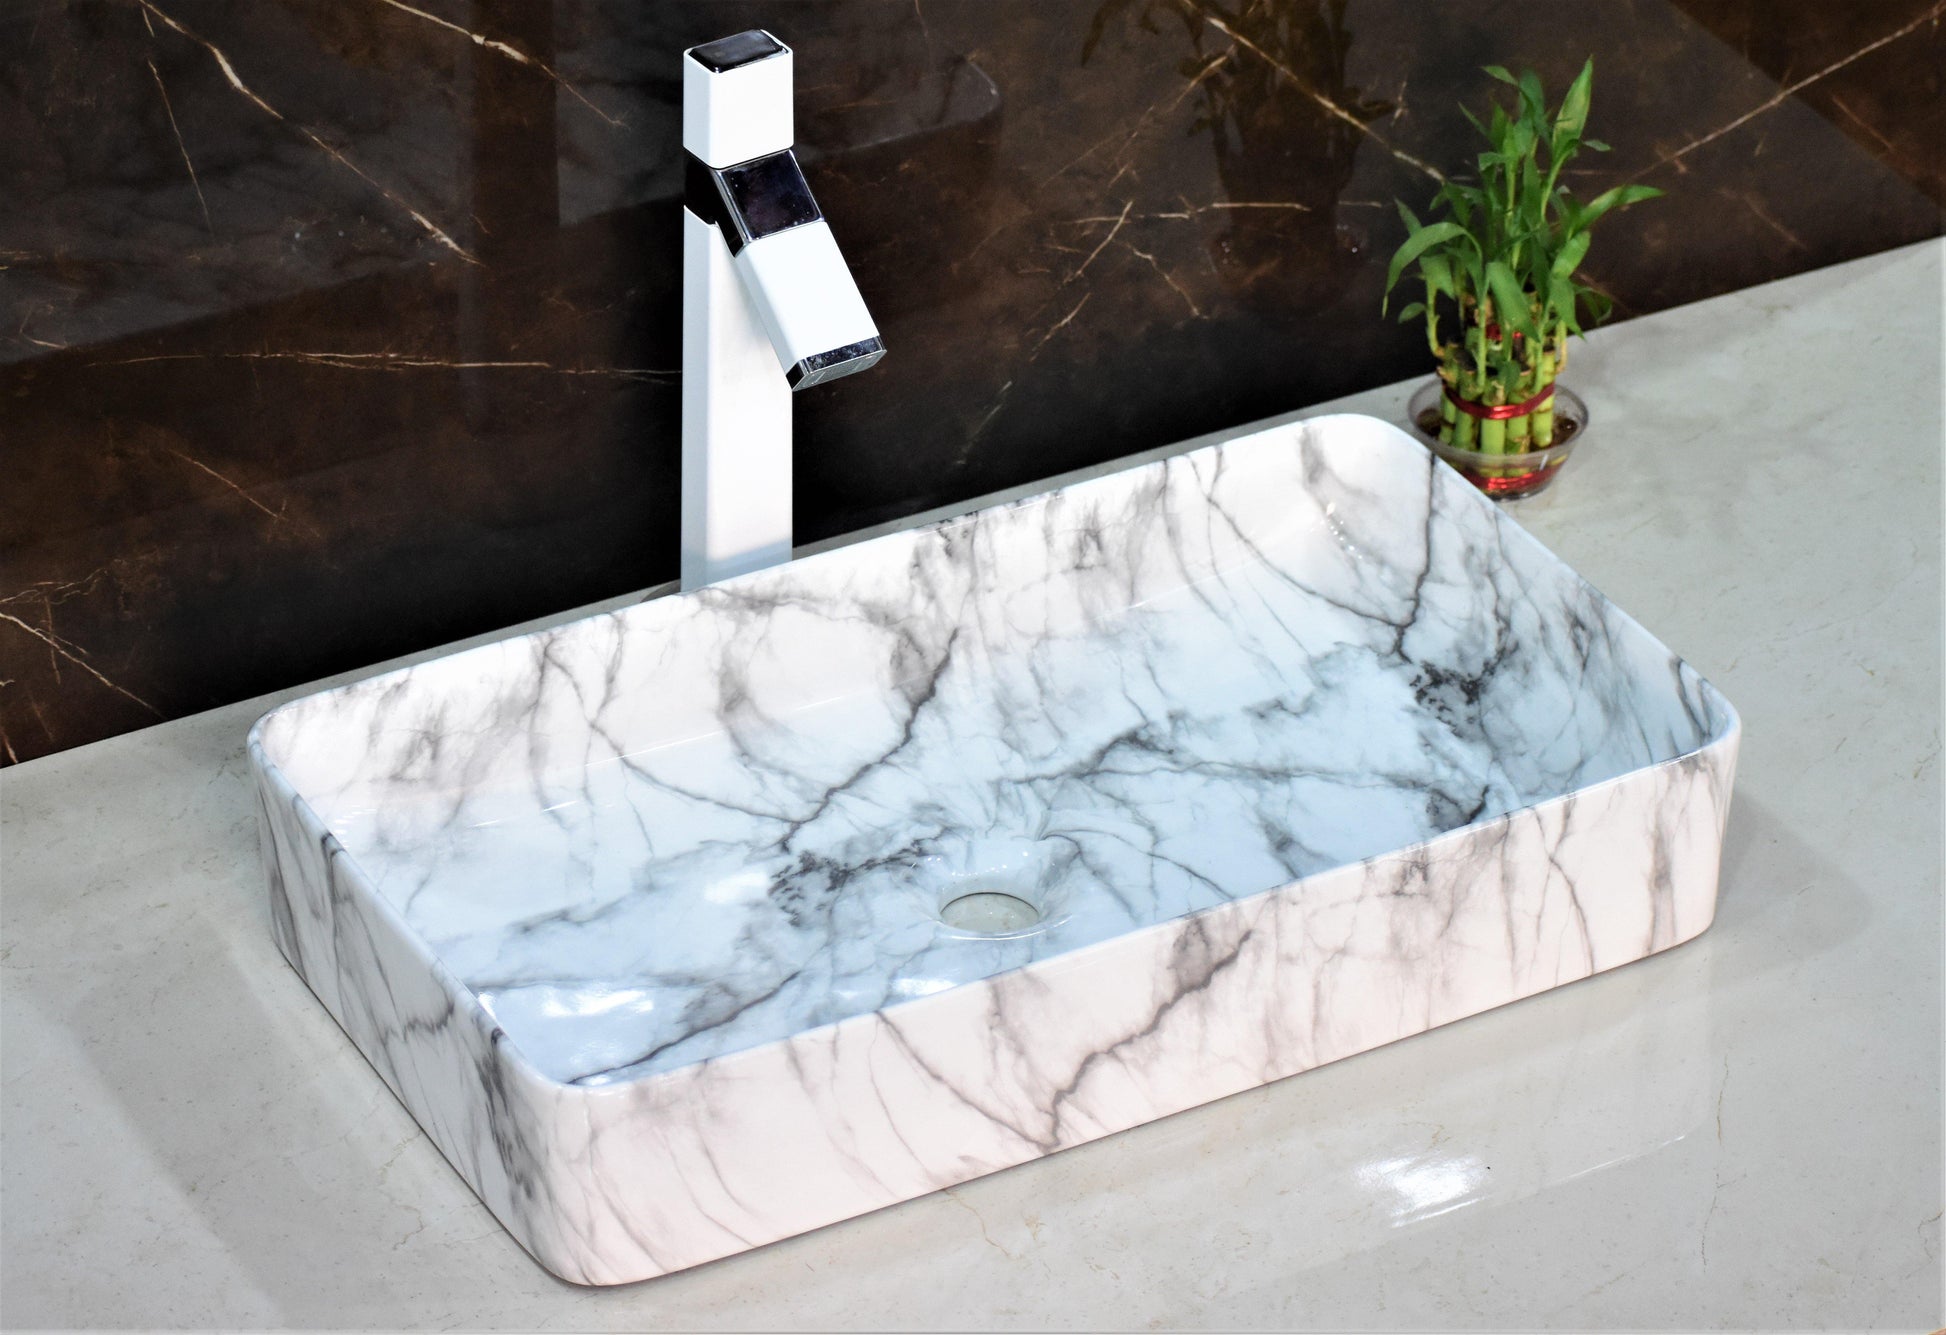 Ceramic Premium Desisgner Table Top Over Counter Vessel Sink Wash Basin for Bathroom 24 x 14 x 4.5 Inch Rectangle Shape White Marble - Bath Outlet